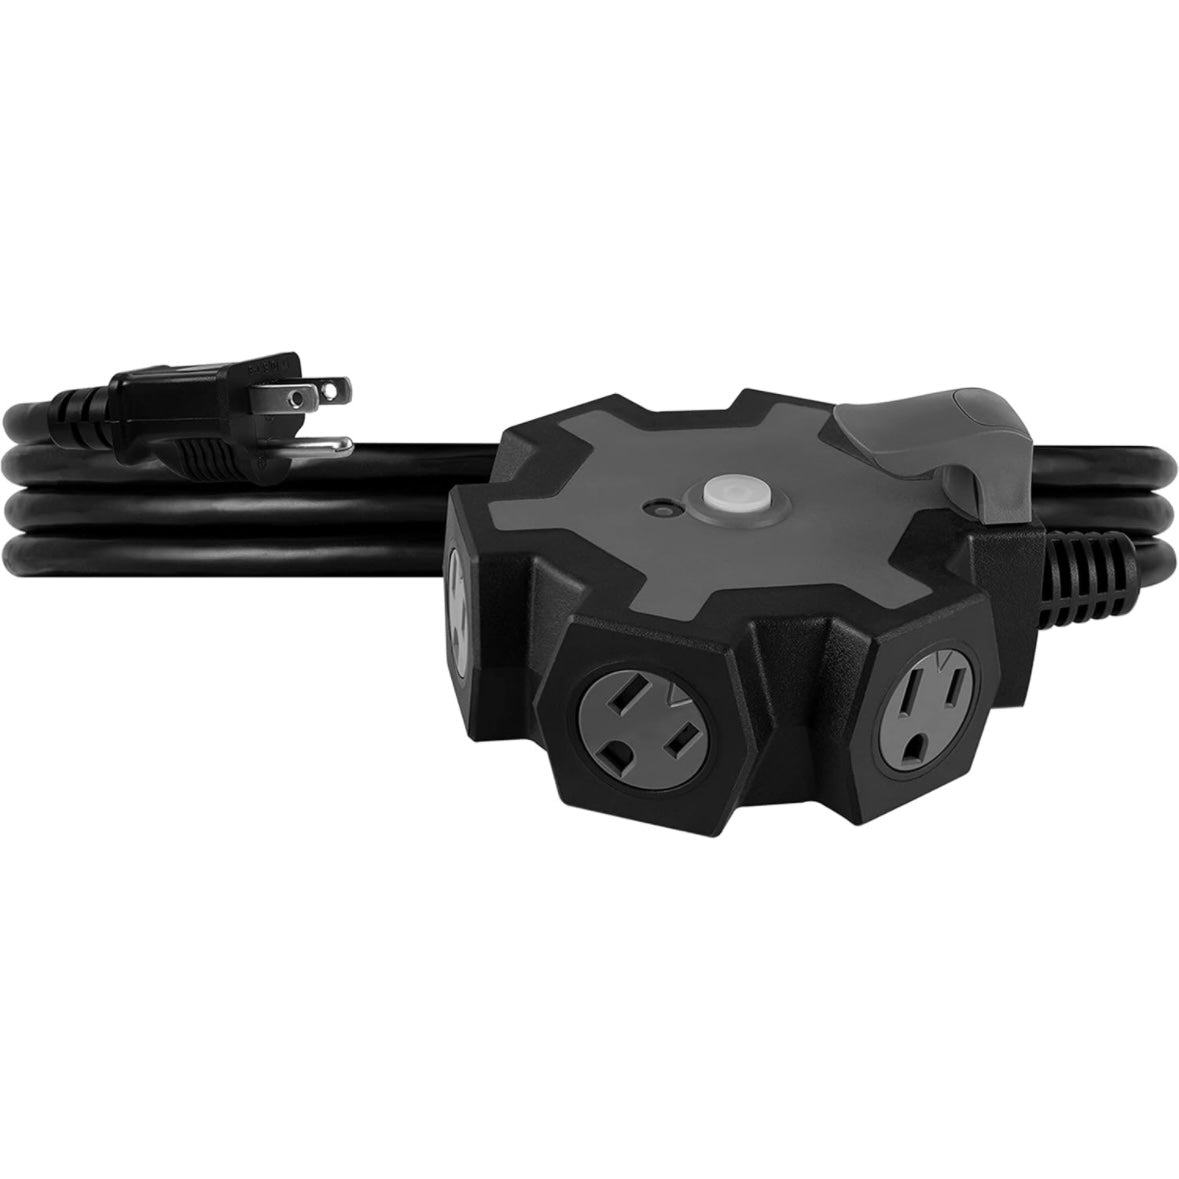 UltraPro 15ft Extension Cord Hub With 5 Grounded Outlets- Indoor/Outdoor